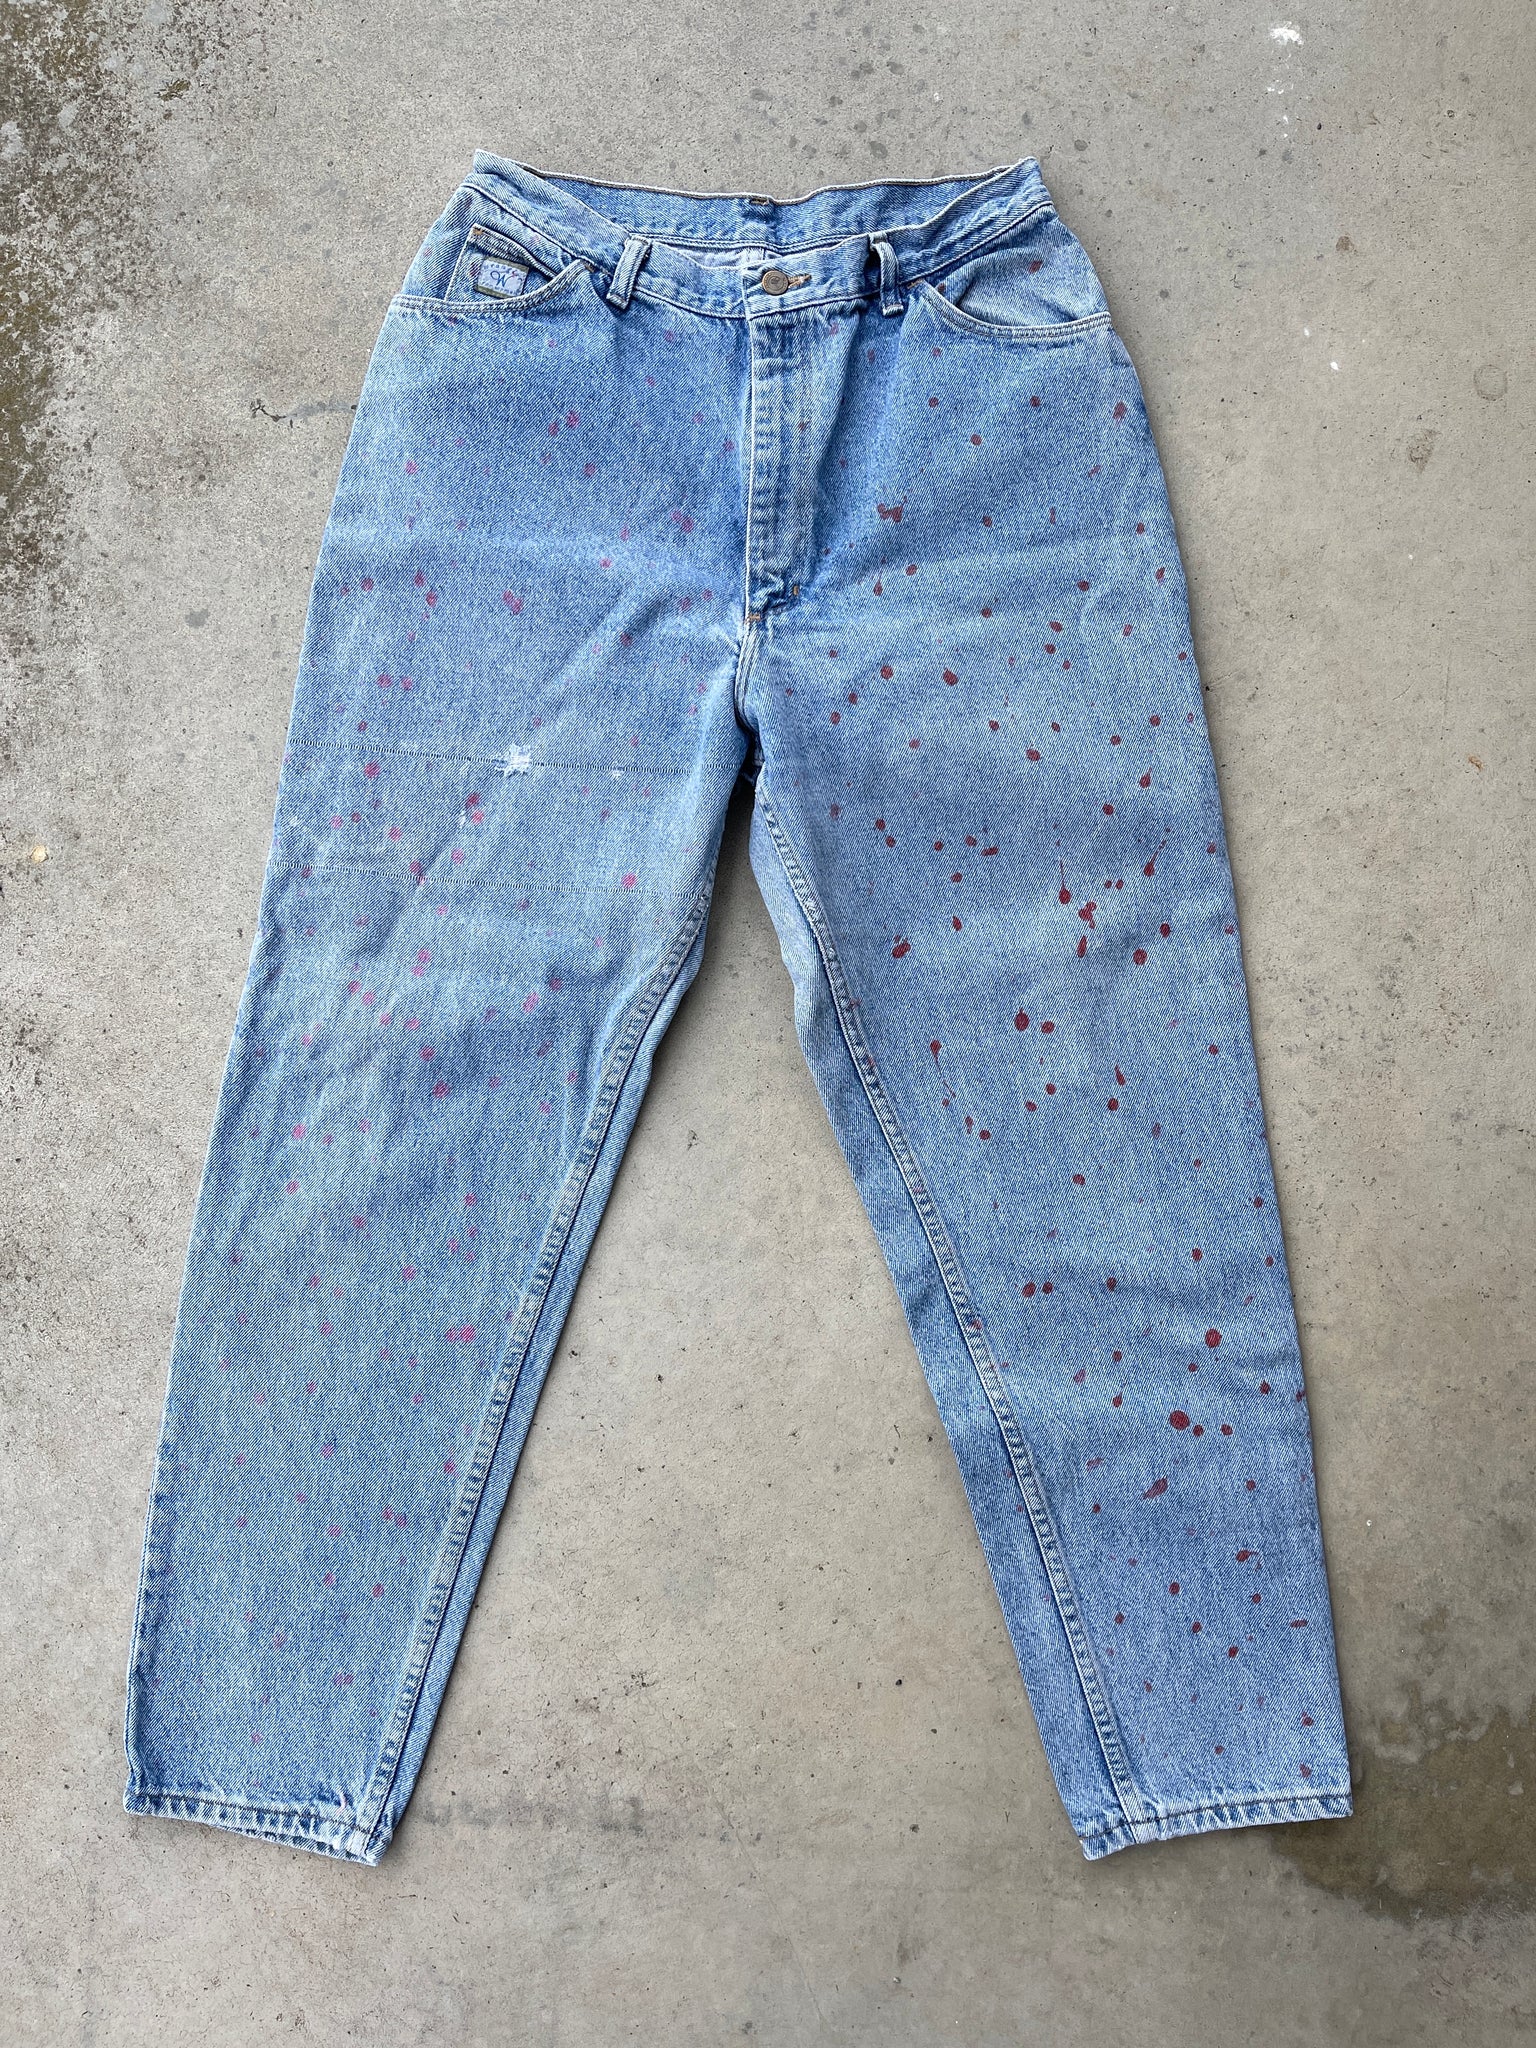 30" wrangler painted jeans